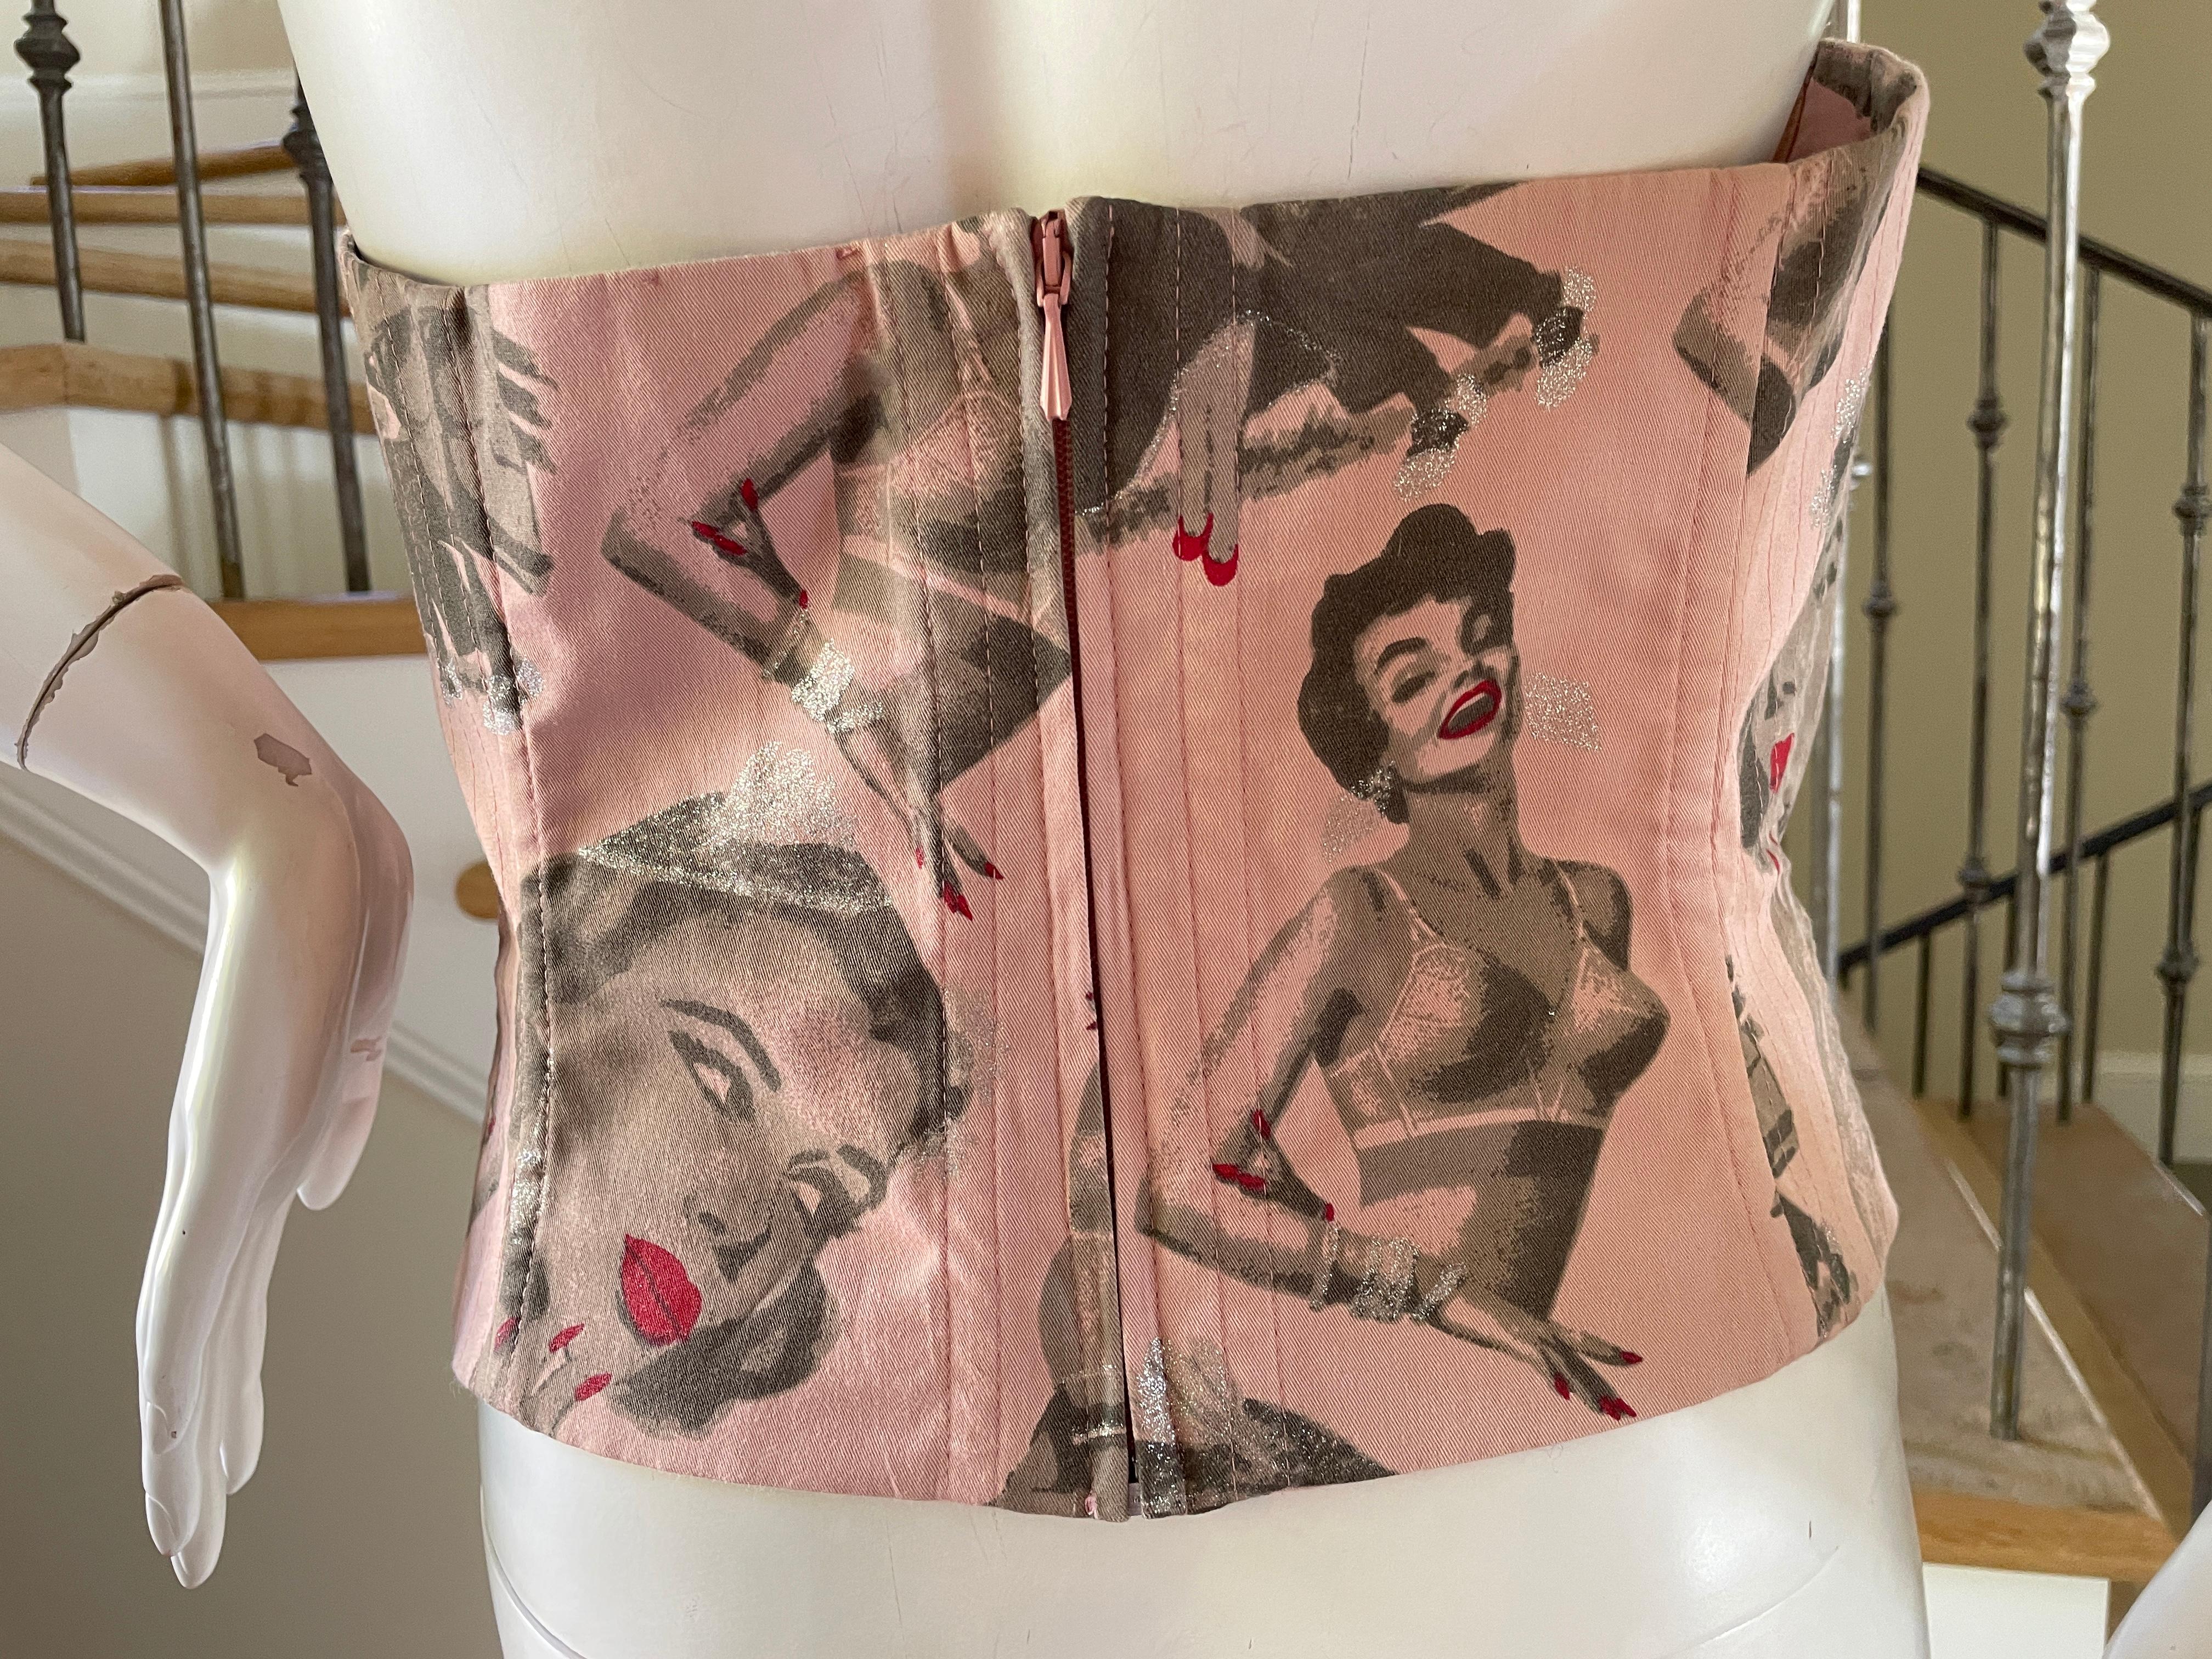 Dolce & Gabbana for D&G Whimsical Vintage Corset with 1950's Bra Advertisment's 3